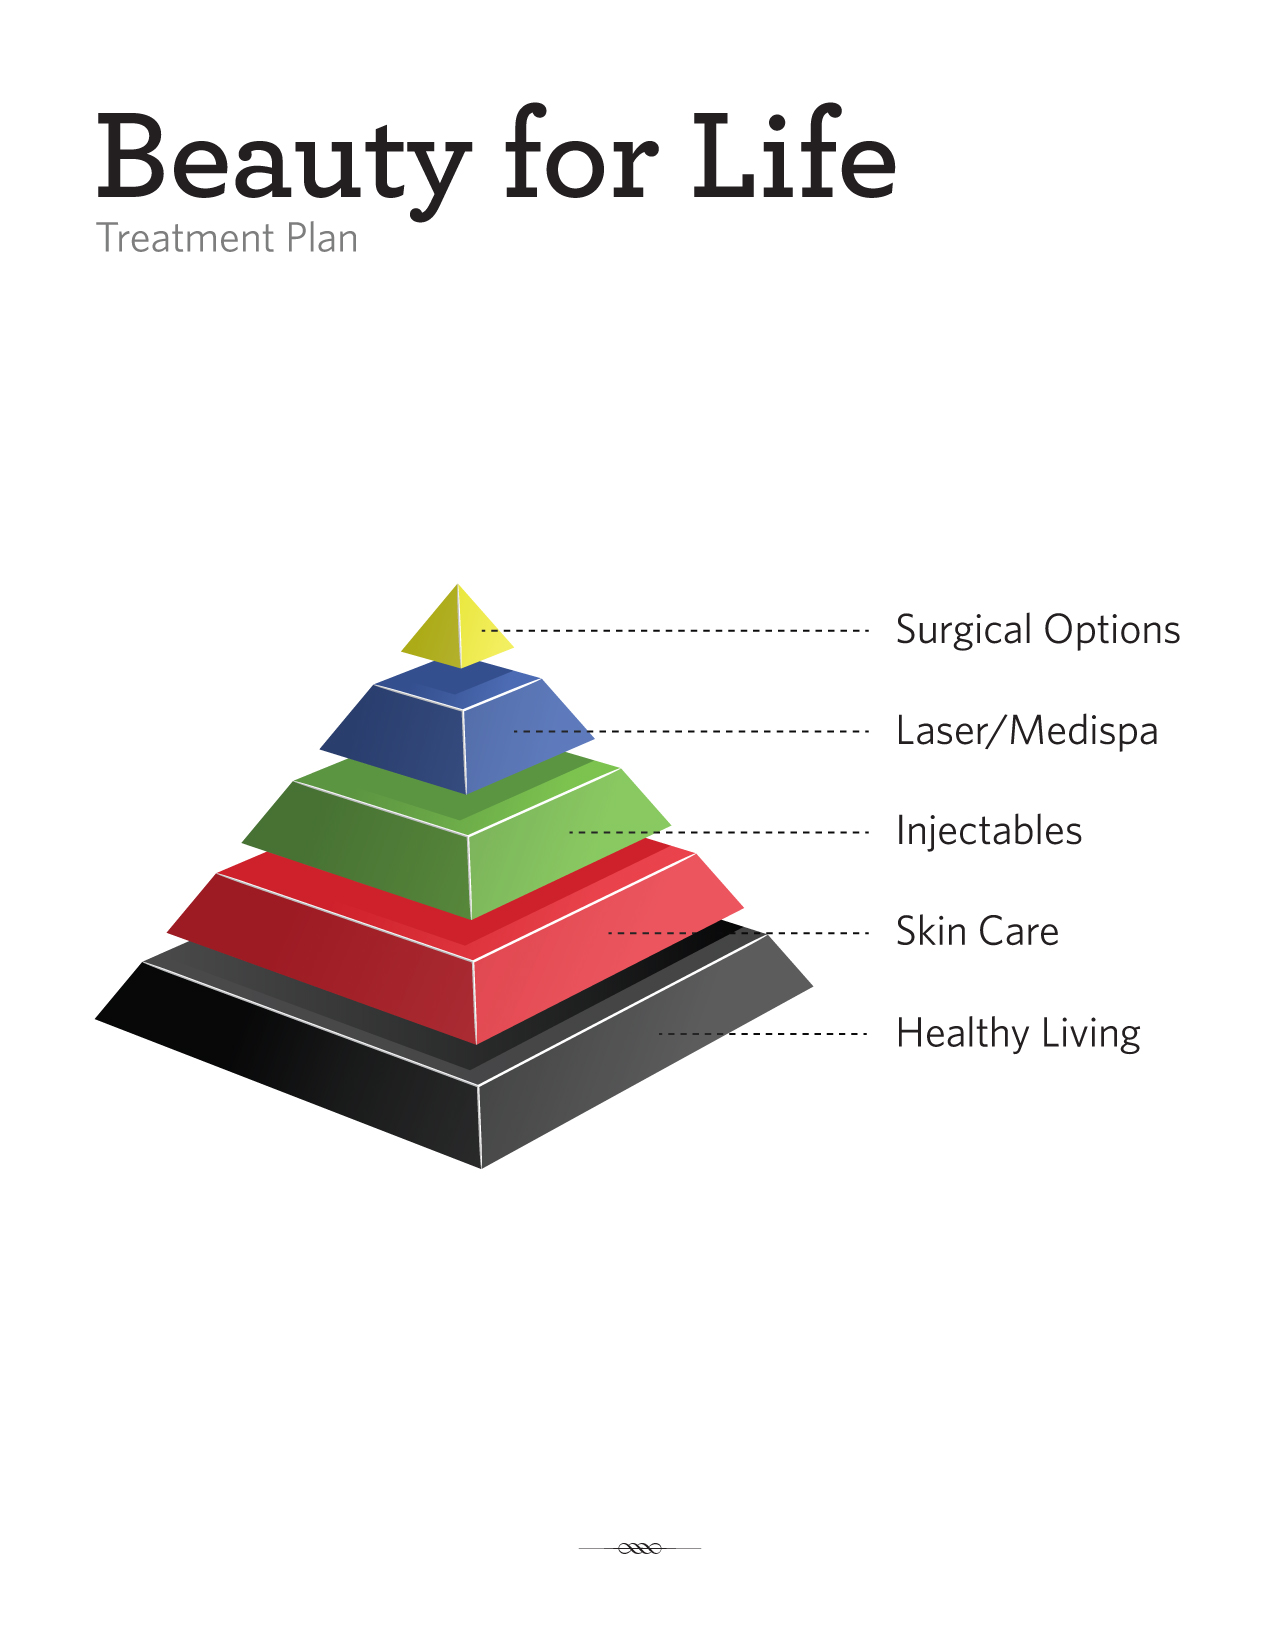 Beauty for Life Pyramid from Orange County Plastic Surgeon